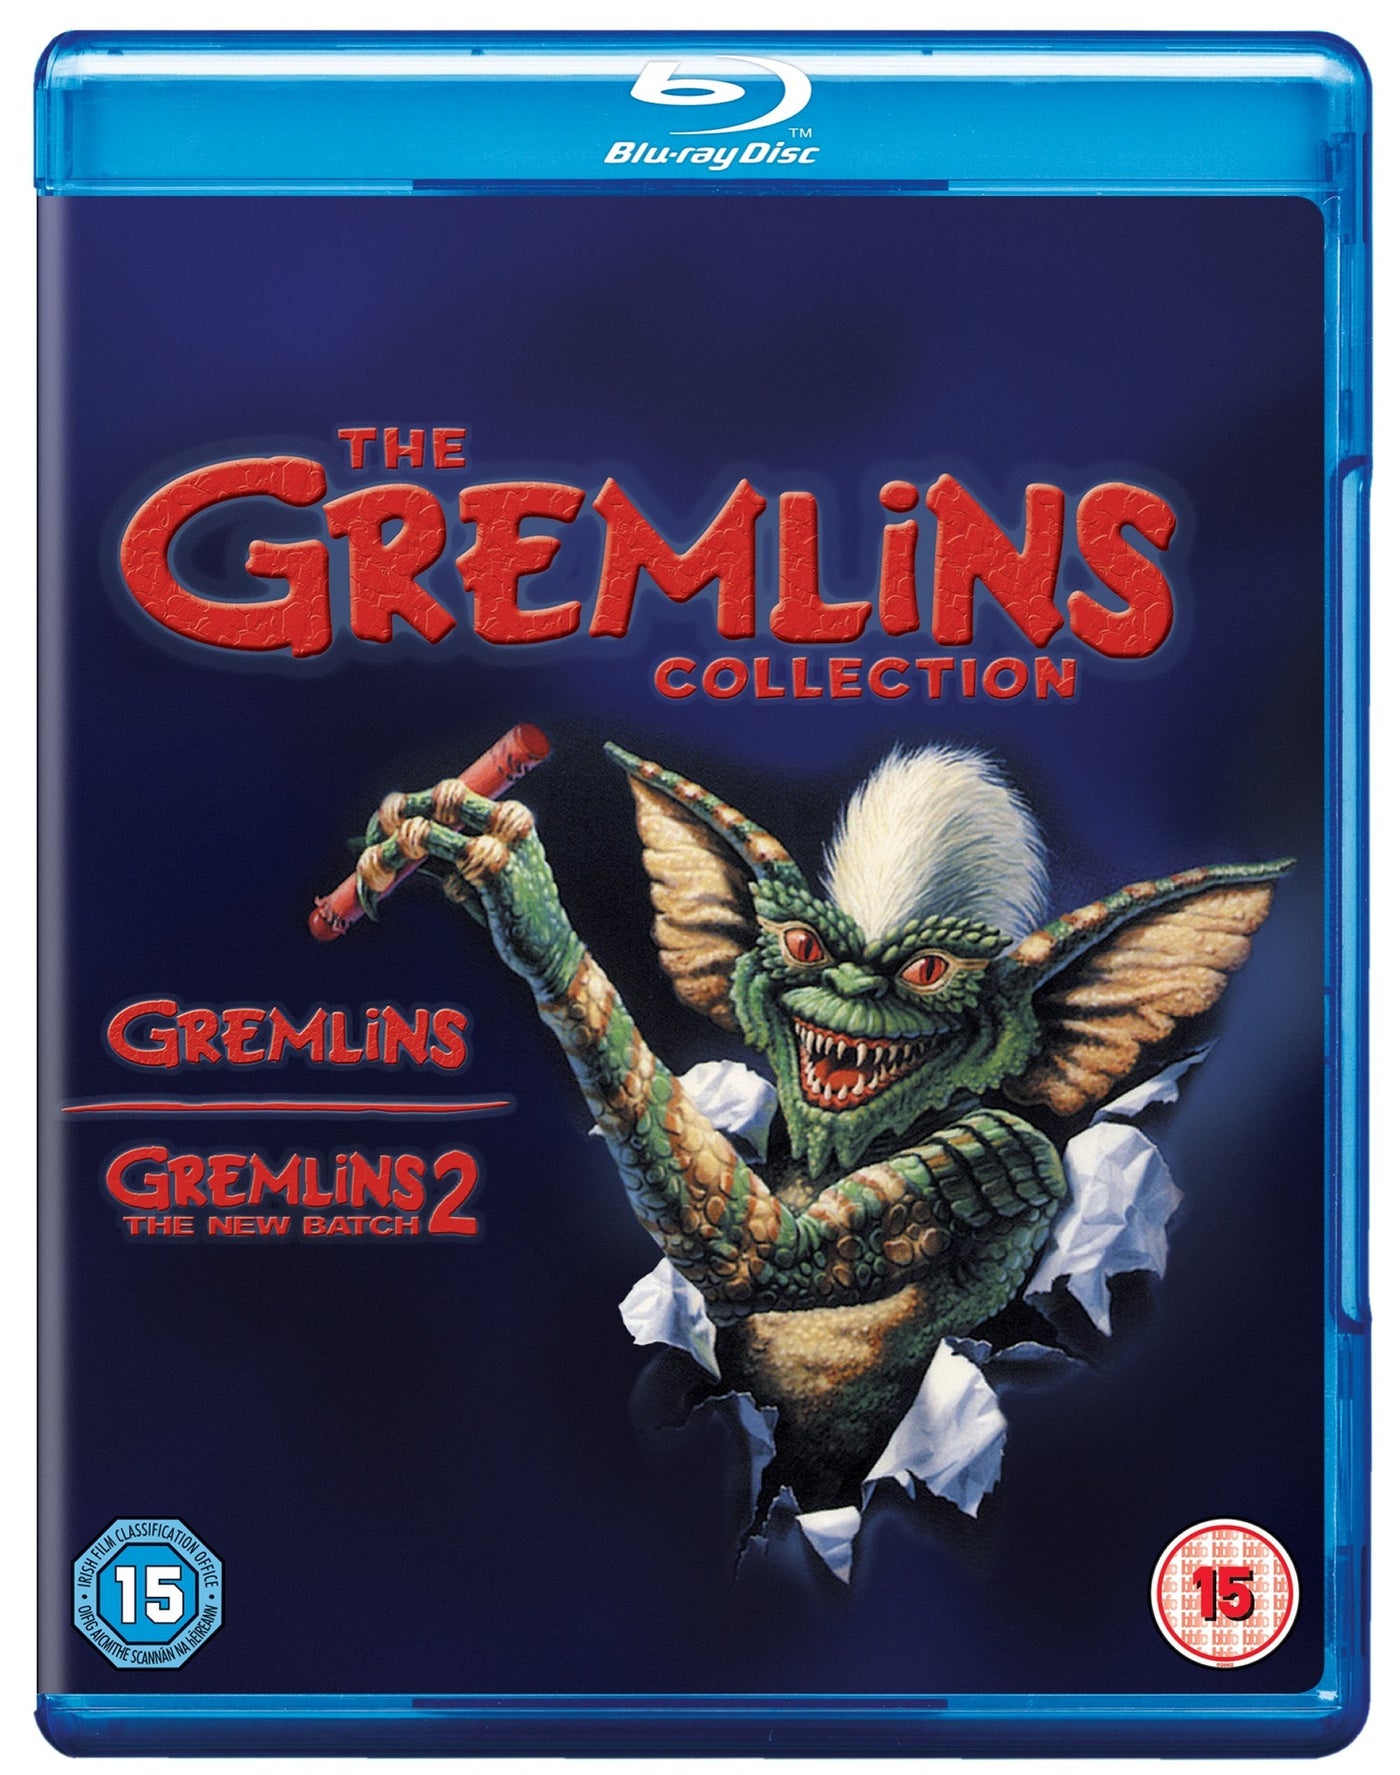 Best of WB 100th: Gremlins 2-Film Collection (DVD) 